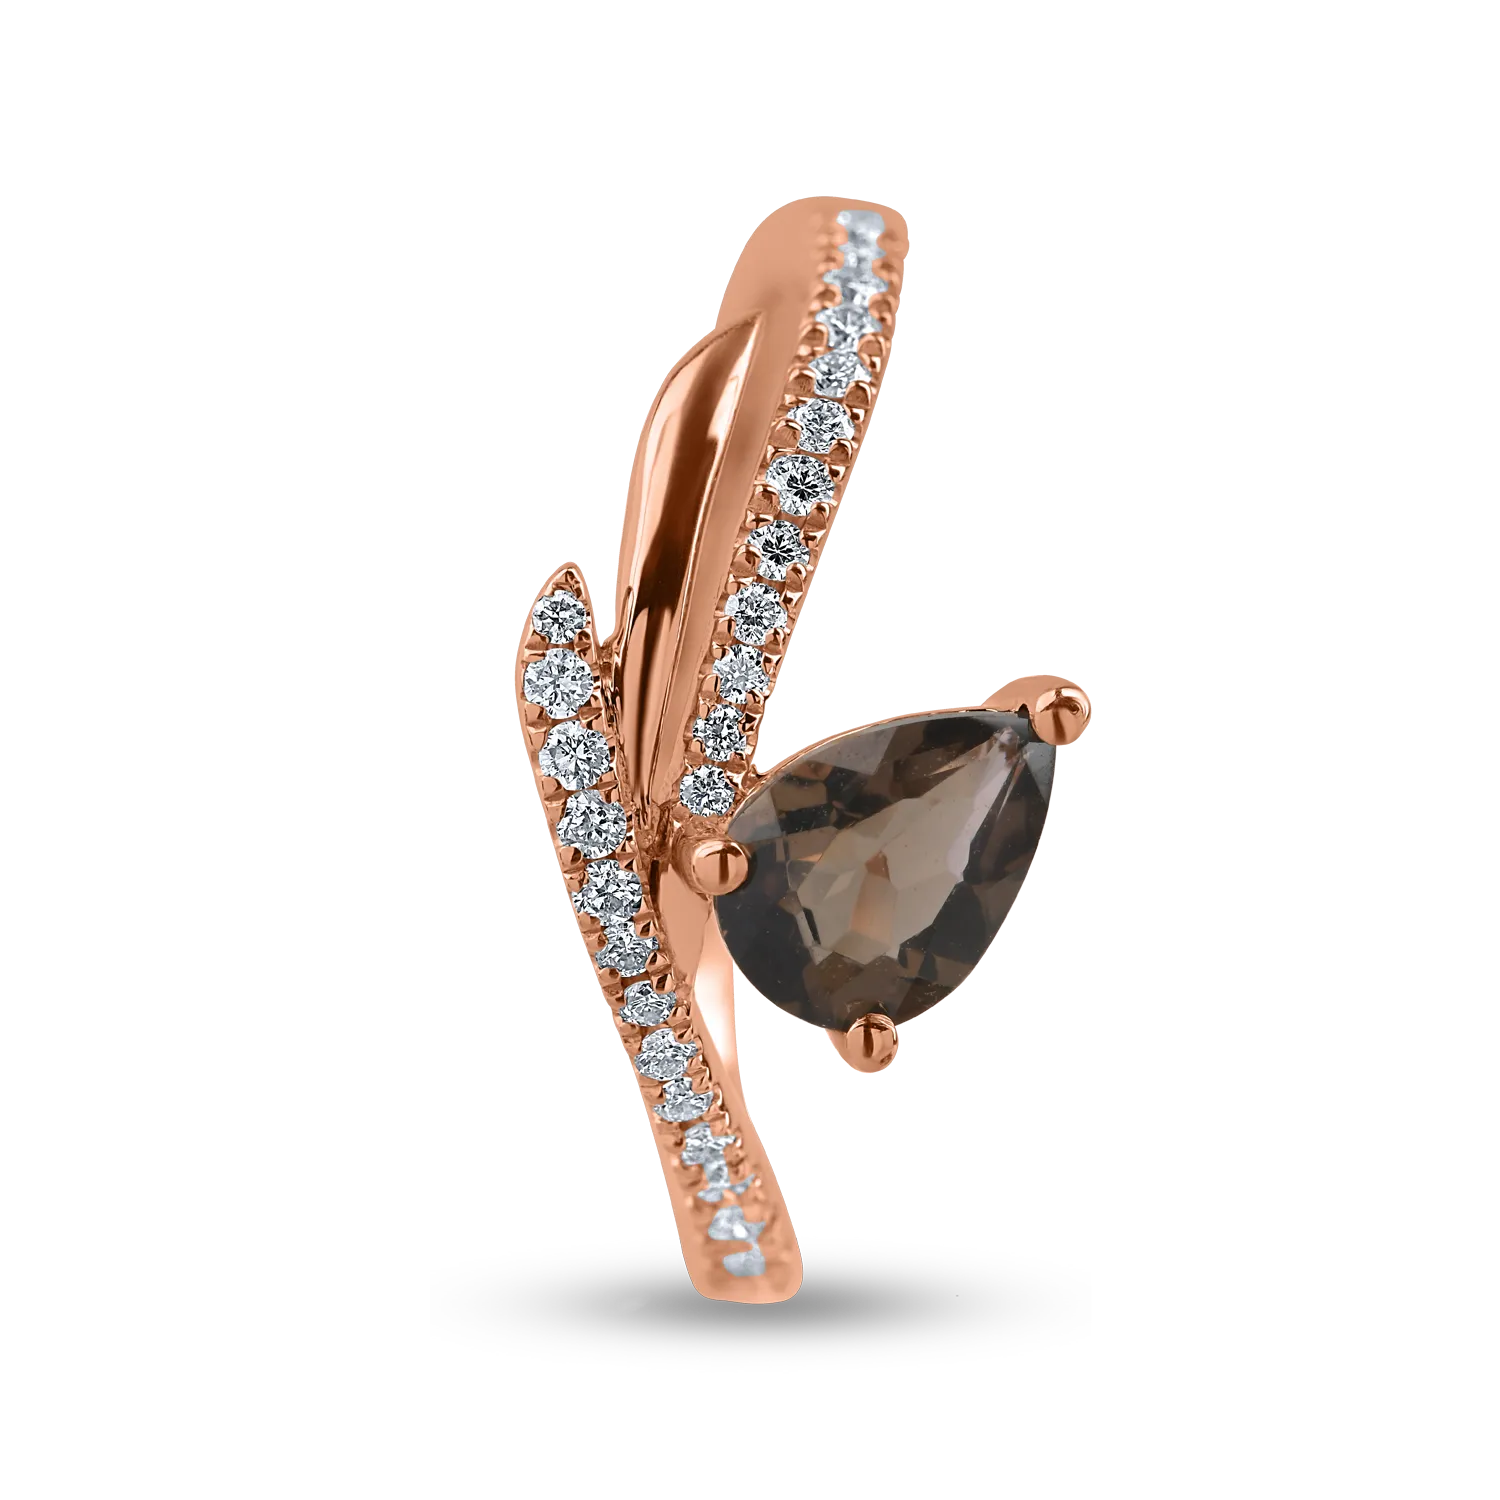 Rose gold ring with 0.58ct smoky quartz and 0.177ct diamonds